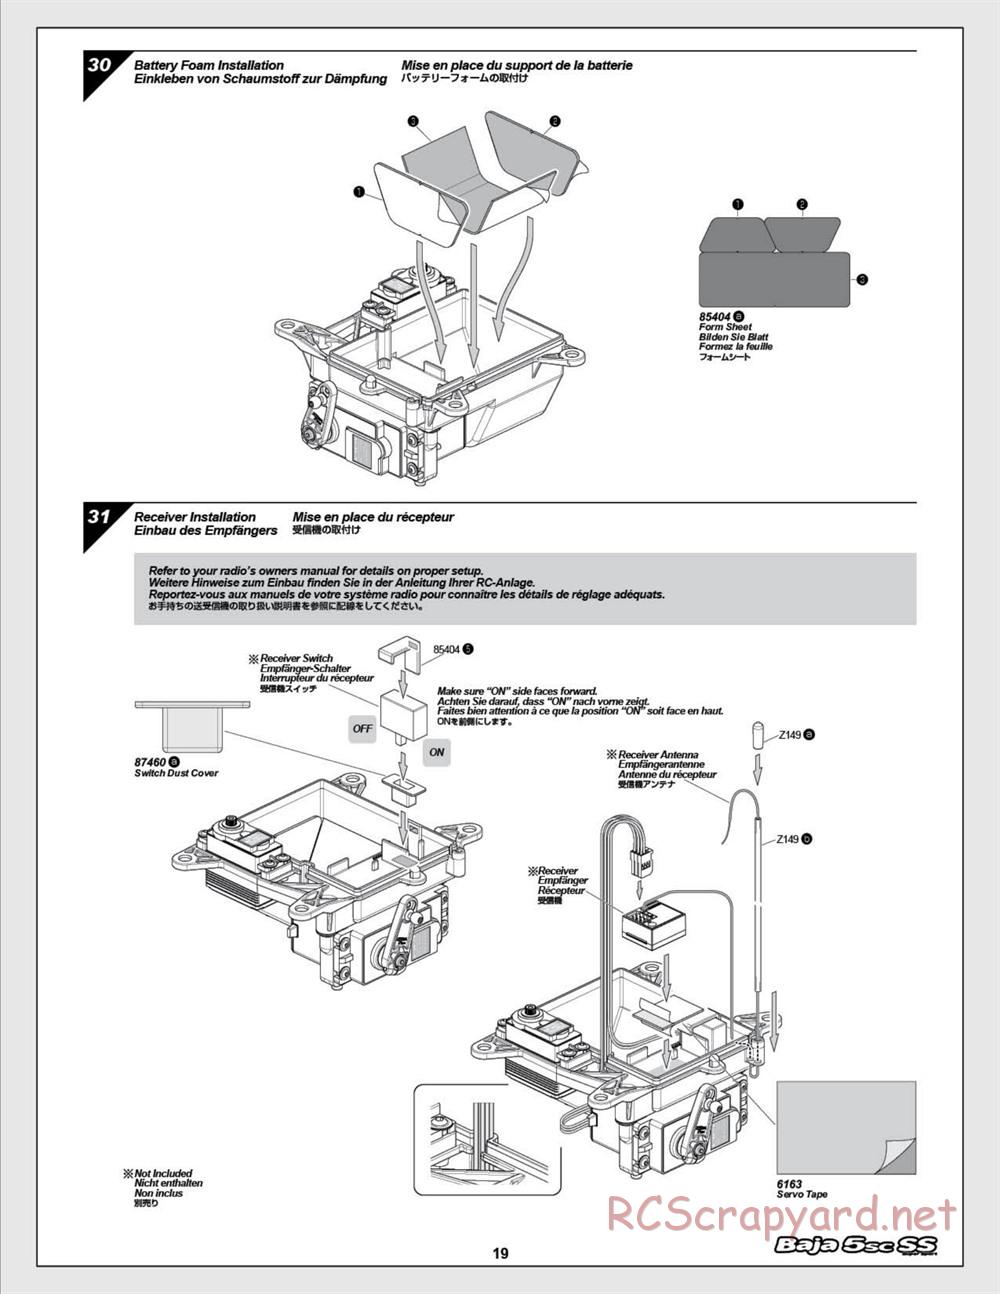 HPI - Baja 5SC SS - Exploded View - Page 19